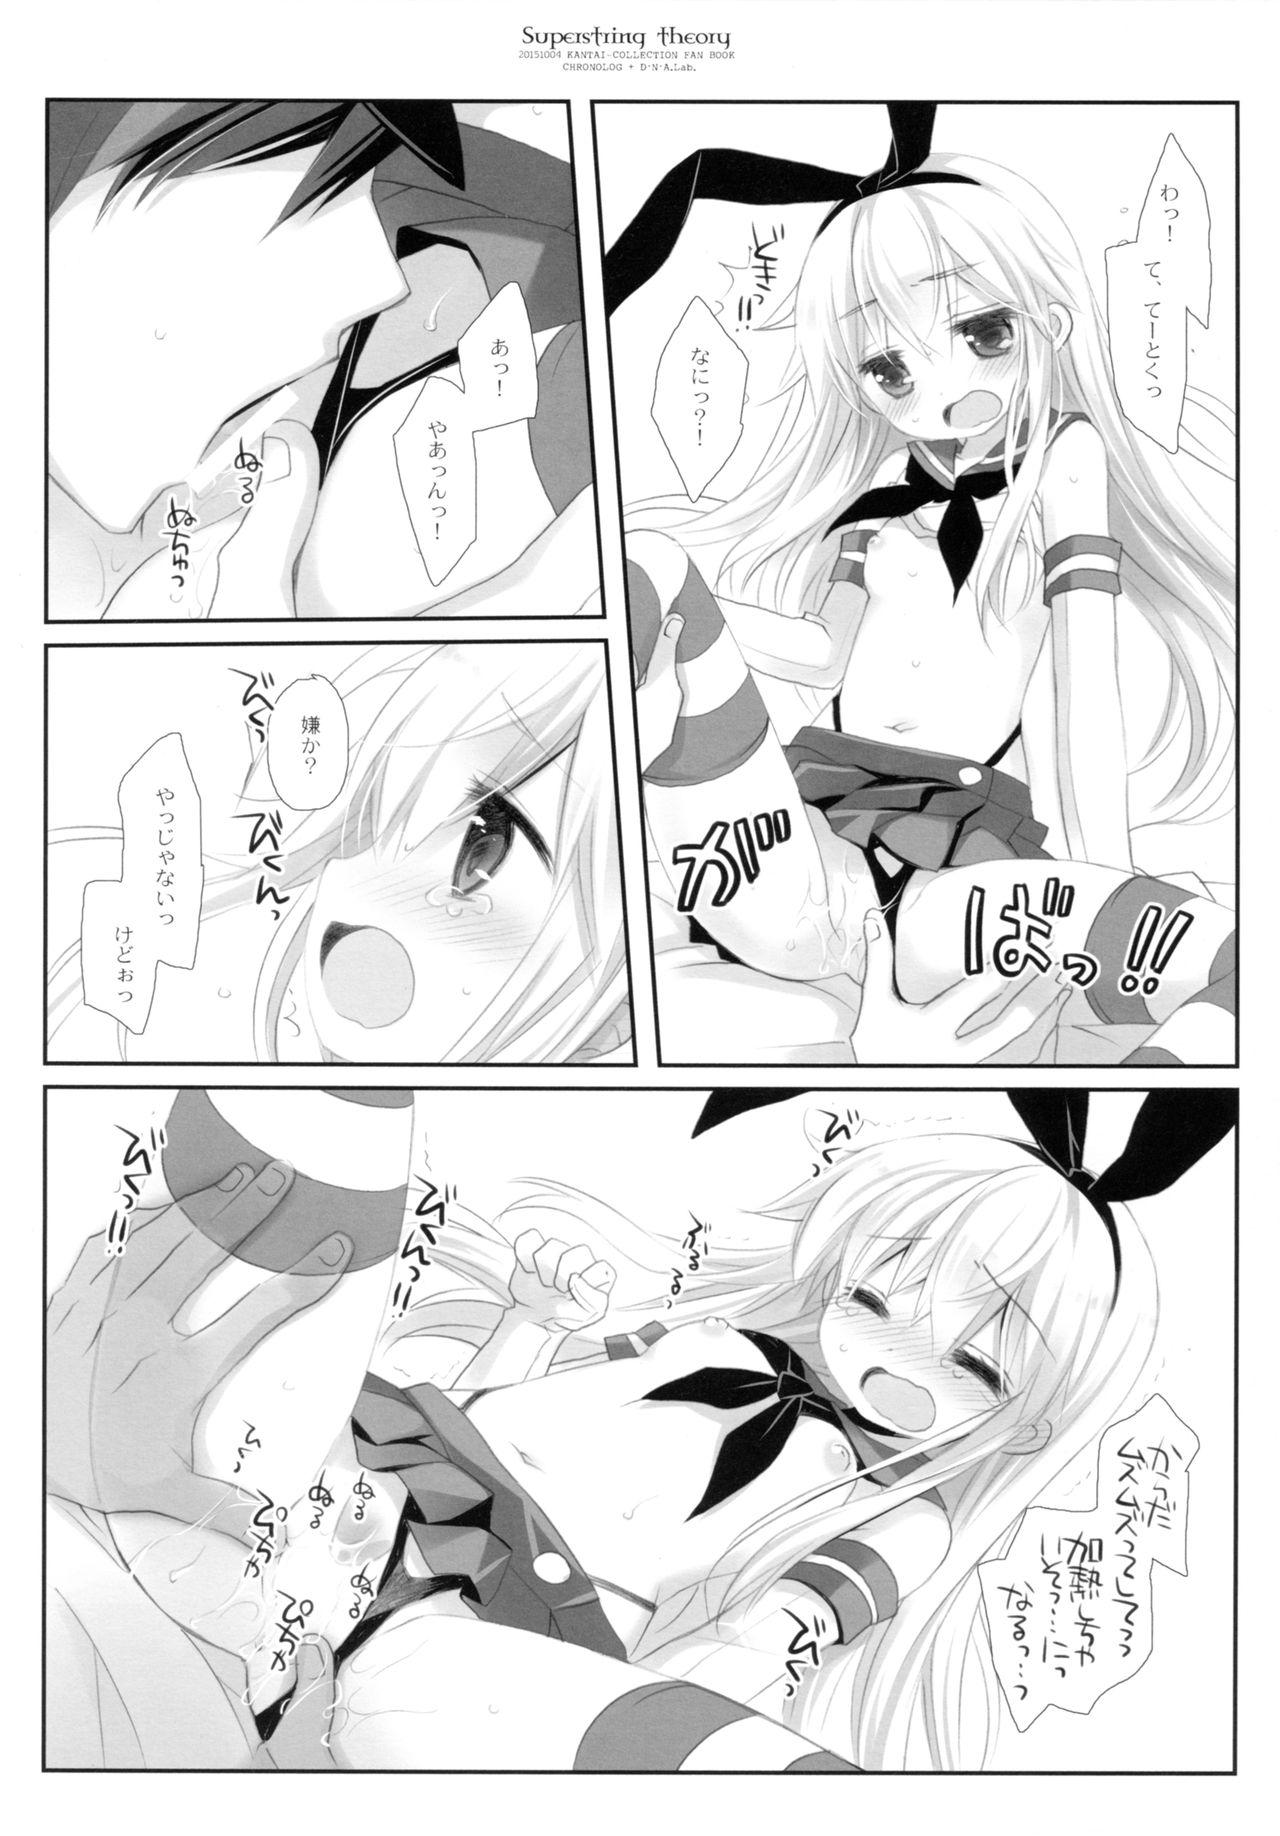 Ano Super String Theory - Kantai collection Hot Girls Getting Fucked - Page 7